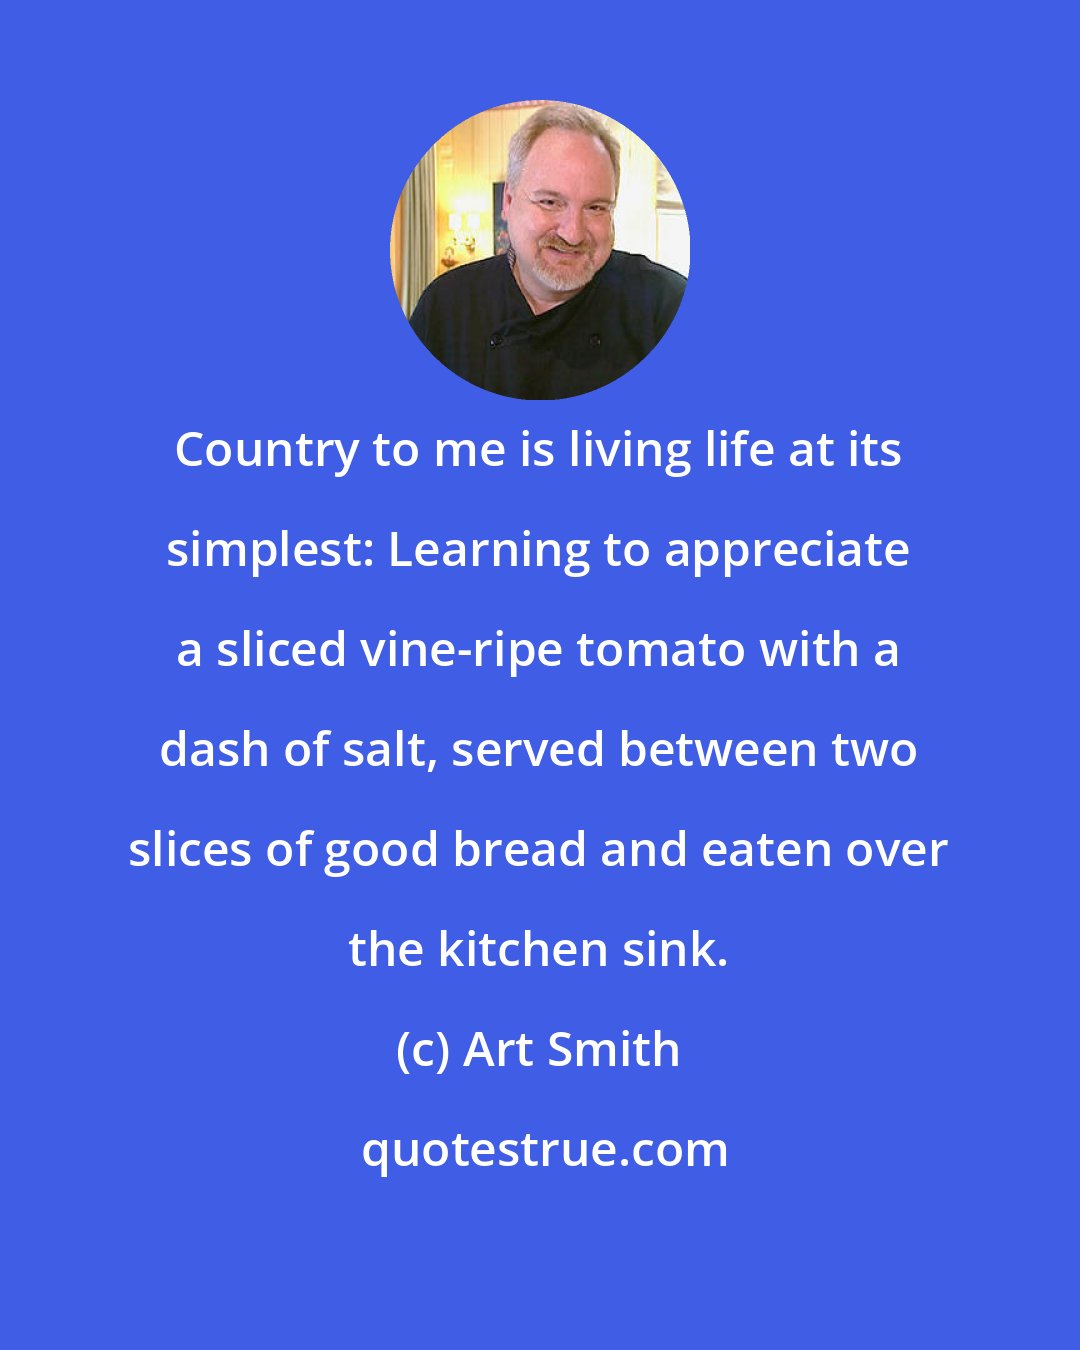 Art Smith: Country to me is living life at its simplest: Learning to appreciate a sliced vine-ripe tomato with a dash of salt, served between two slices of good bread and eaten over the kitchen sink.